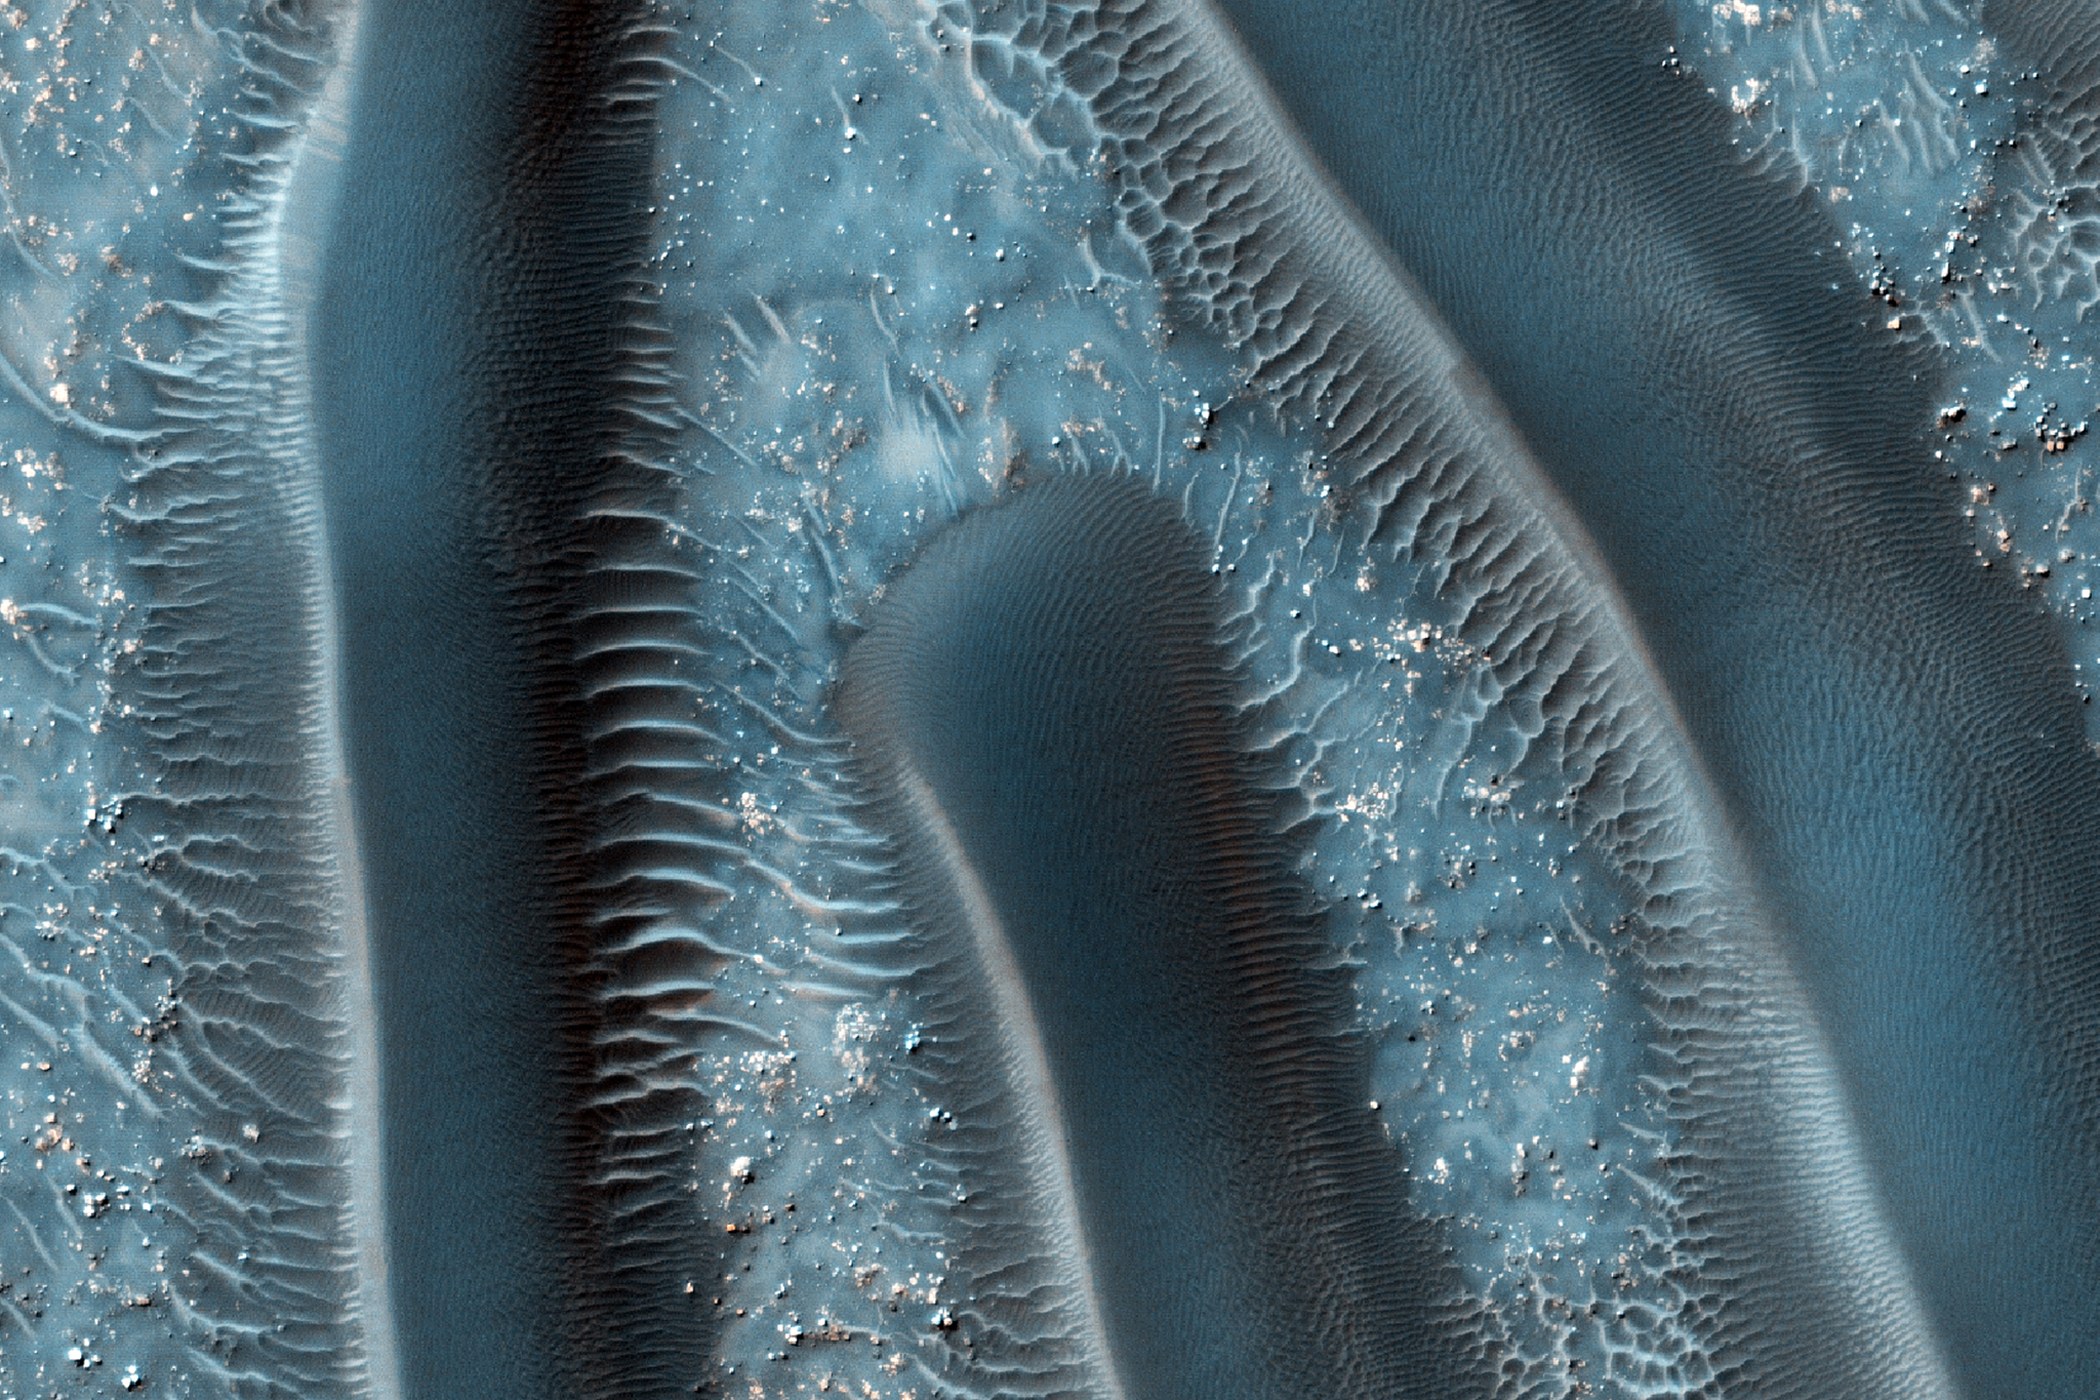 Sand dunes are among the most widespread aeolian features present on Mars. Their spatial distribution and morphology are sensitive to subtle shifts in wind circulation patterns and wind strengths. These provide clues to the sedimentary history of the surrounding terrain.